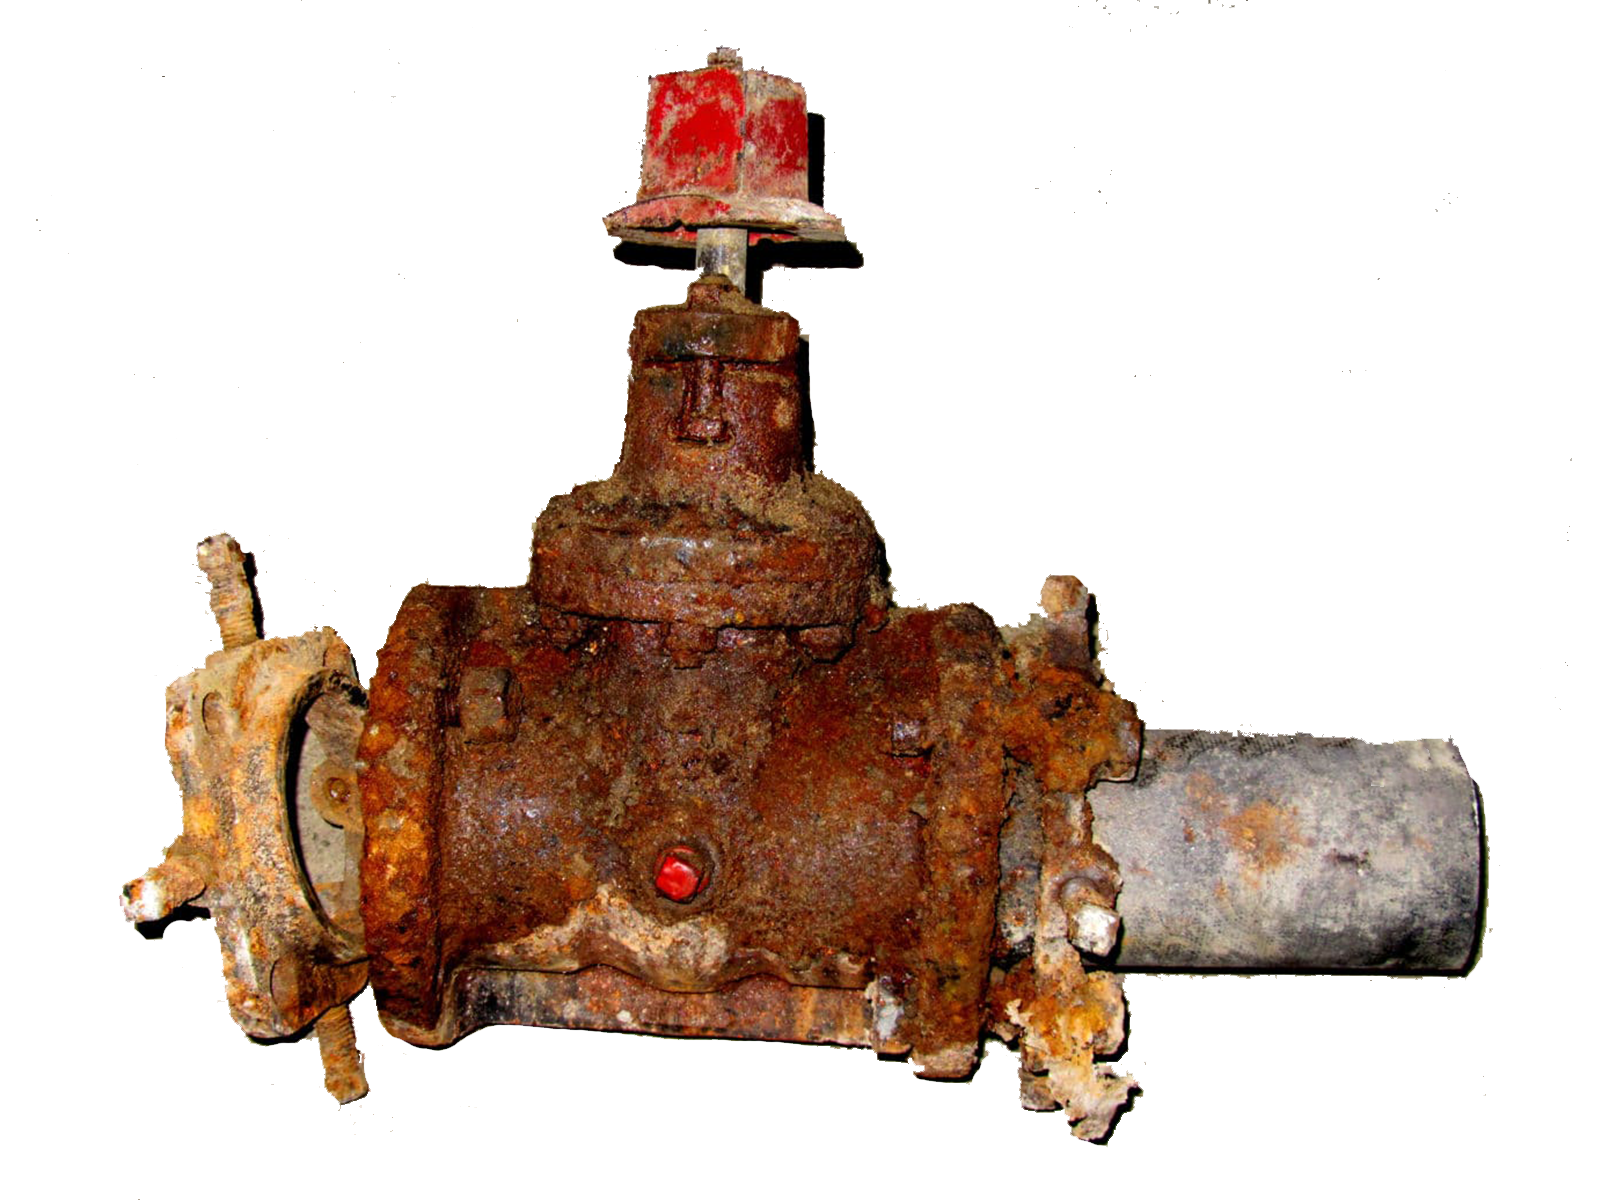 Rotted and corroded sidewalk gate valve: gate valve repair cannot be done on old and corroded valves